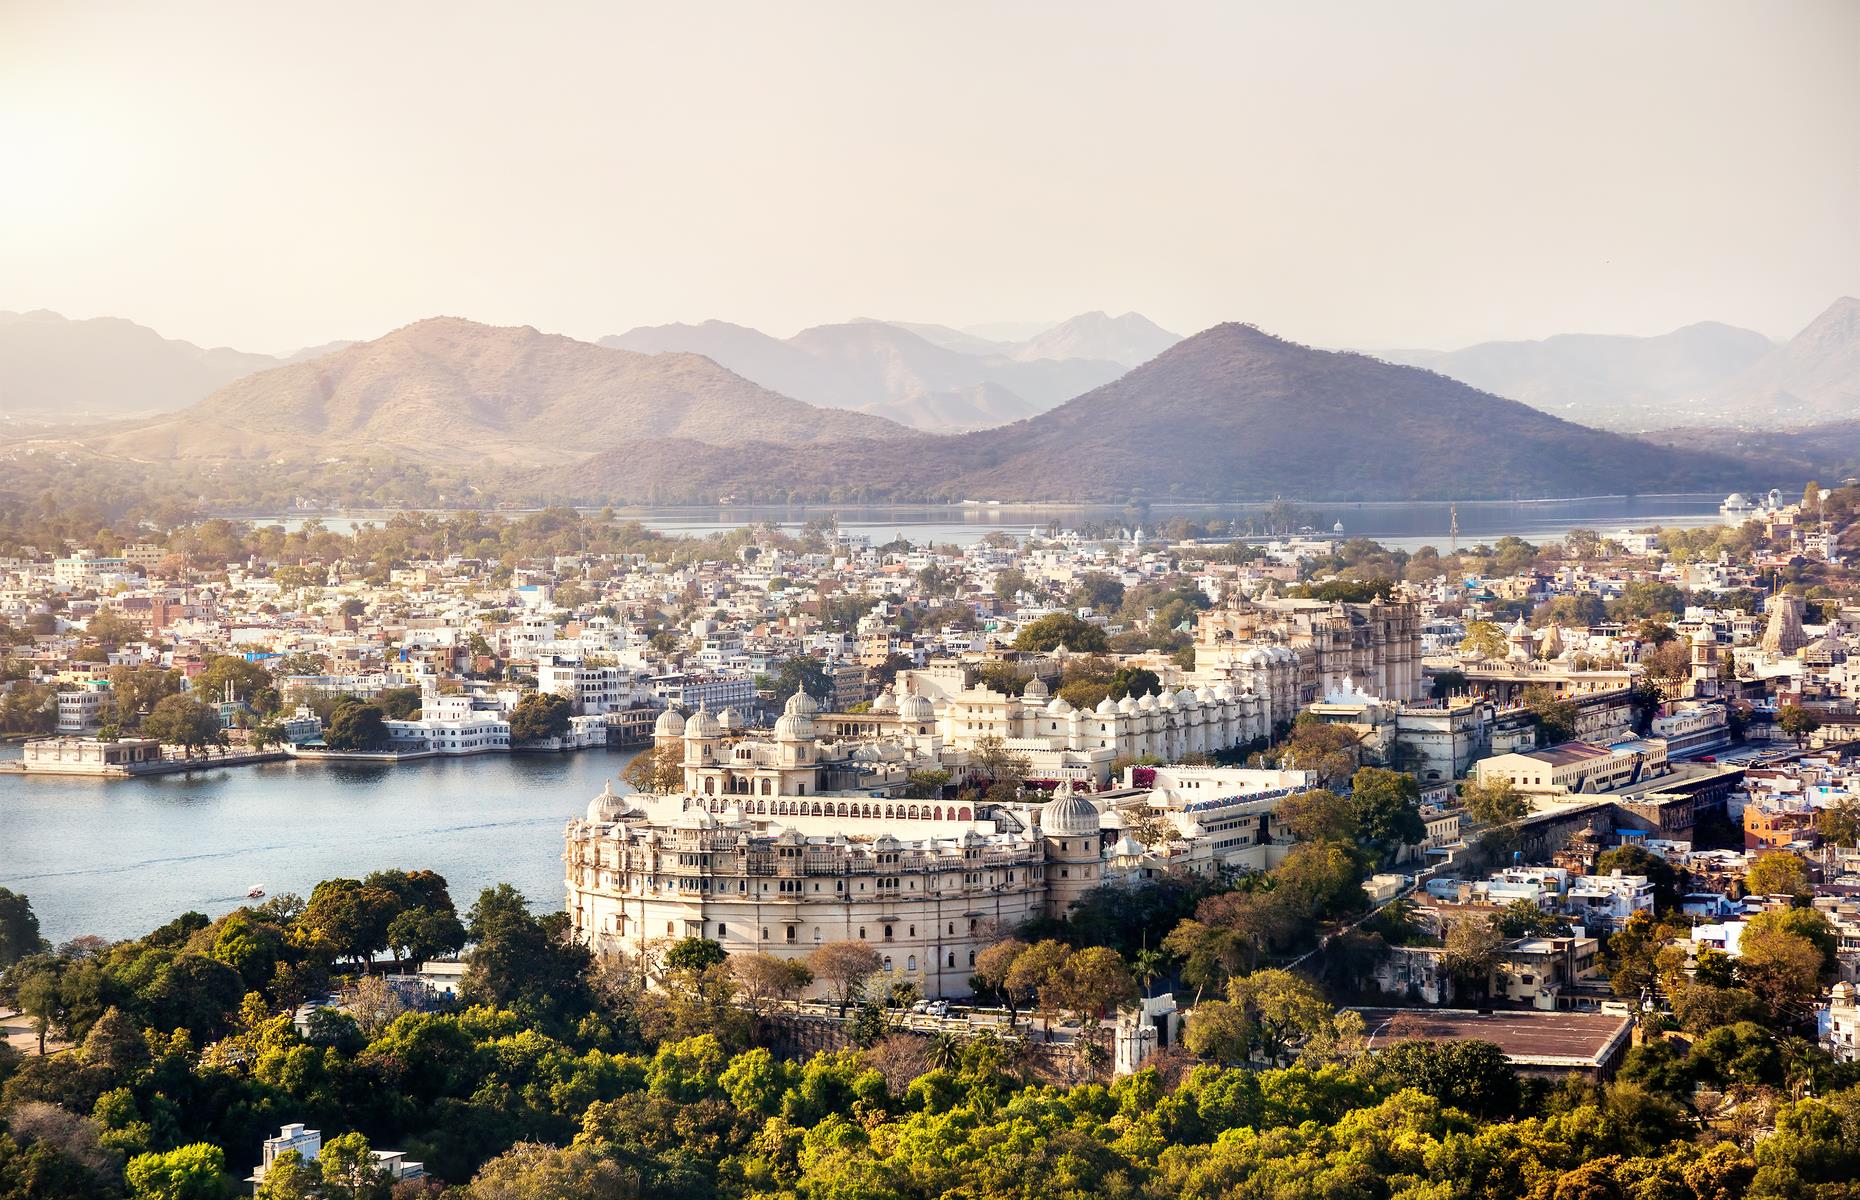 <p>Of all Rajasthan’s beautiful cities, Udaipur is perhaps the most heavenly. Known as the City of the Lakes, it looks almost as though it’s floating on the water, its lime-washed buildings light and dreamily delicate. Surrounded by sawtoothed peaks, this romantic city is a self-contained world full of palaces, forts and havelis (mansions built around courtyards). Its most iconic building is City Palace, Rajasthan’s largest royal complex, made up of 11 dazzling palaces overlooking Lake Pichola.</p>